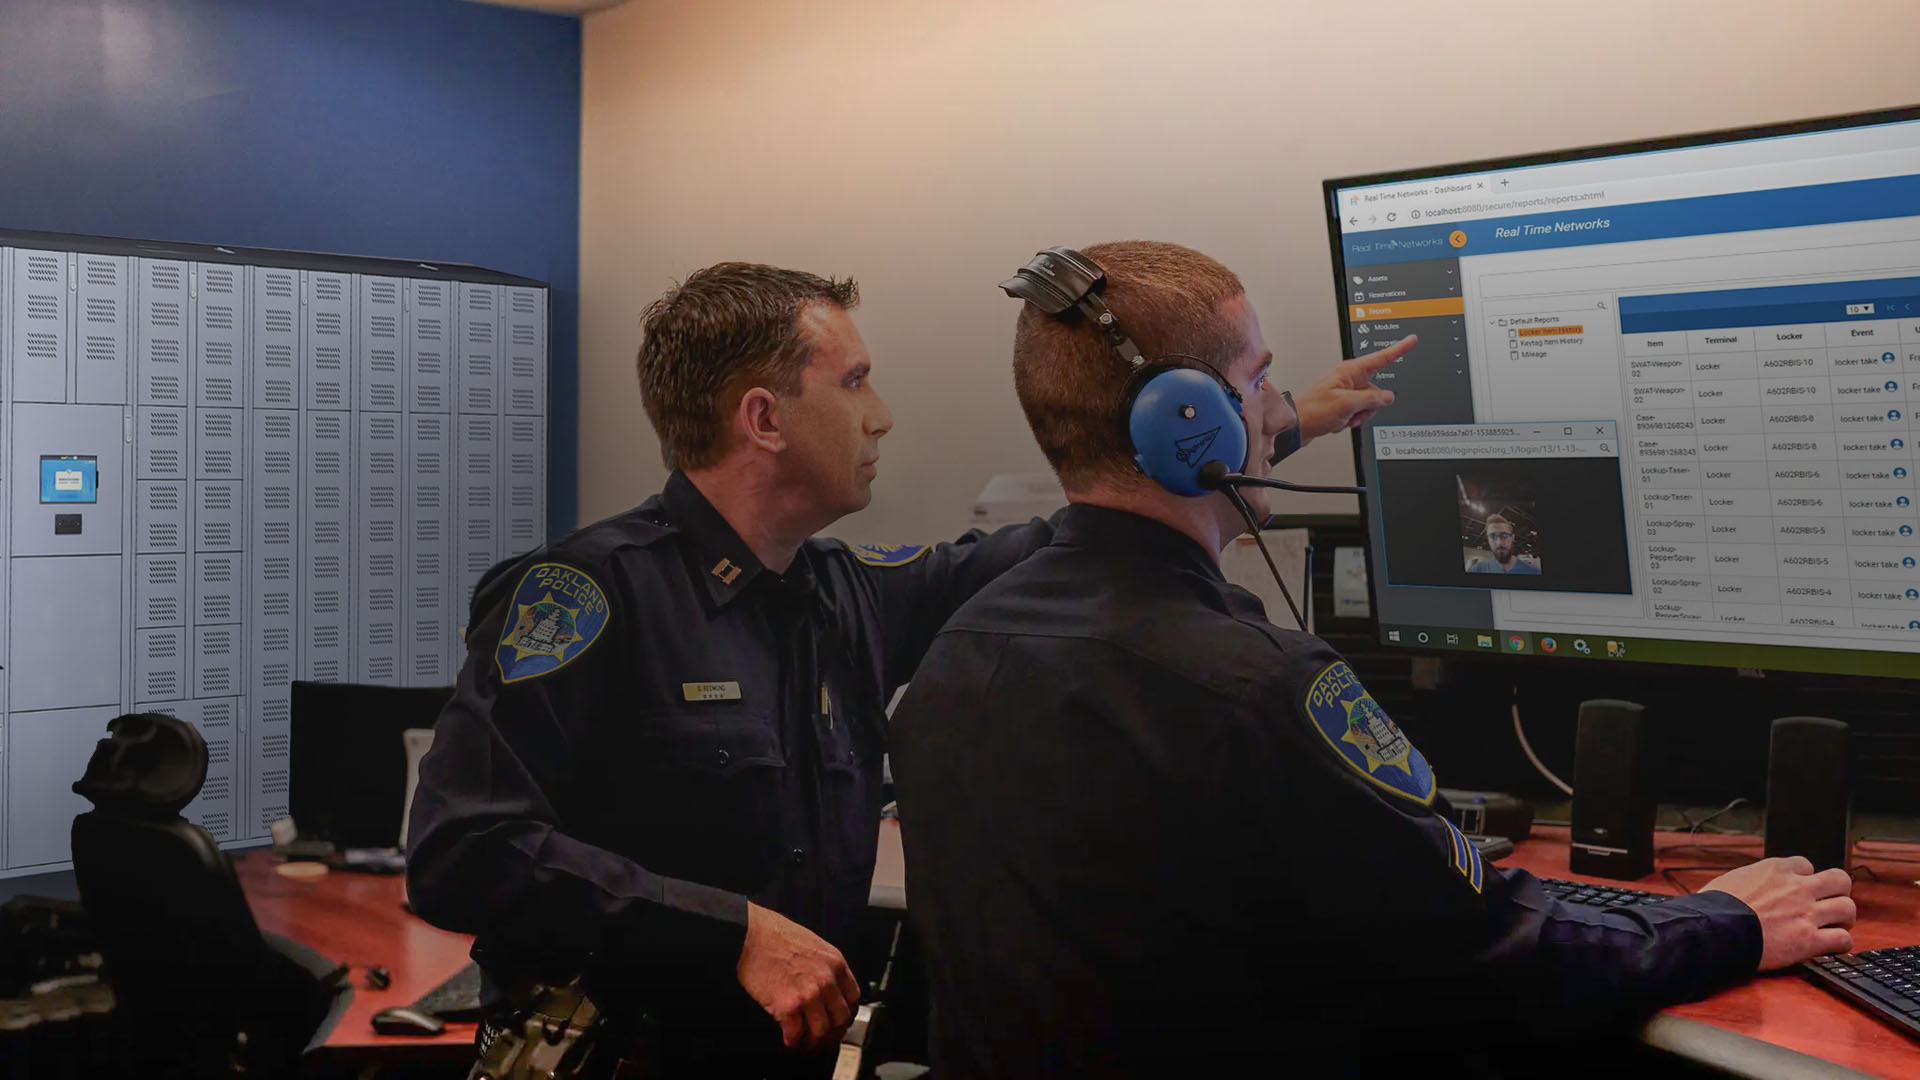 Police Officers Using a Police Locker to Manage Police Gear, Weapons and Assets.